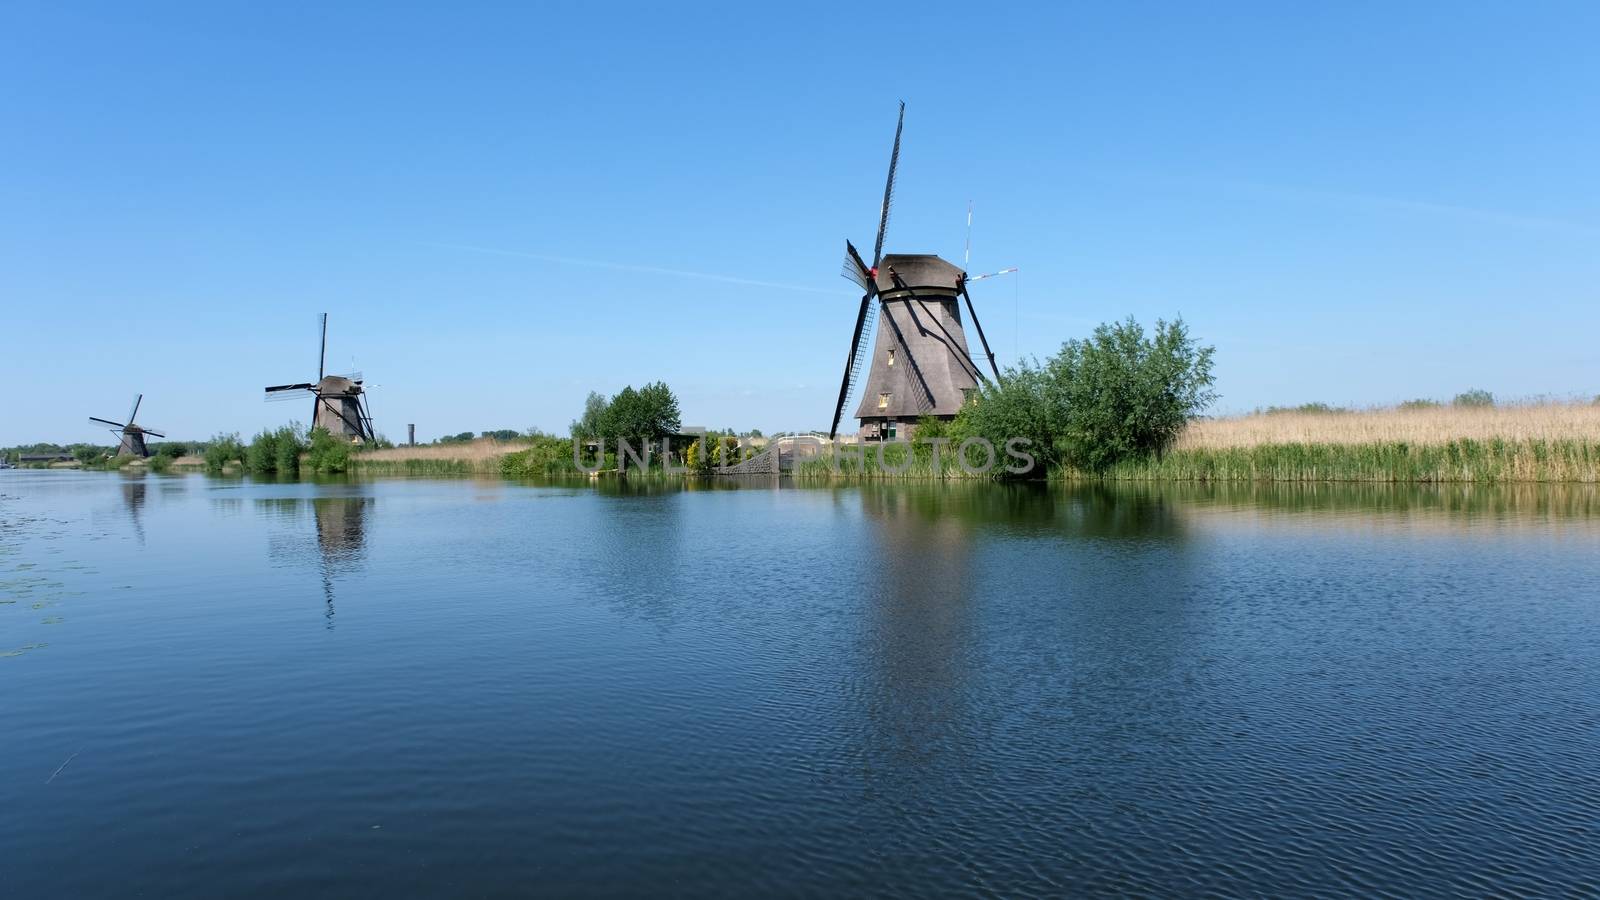 Windmills and water canal in Kinderdijk, Holland or Netherlands. Unesco world heritage site. Europe.